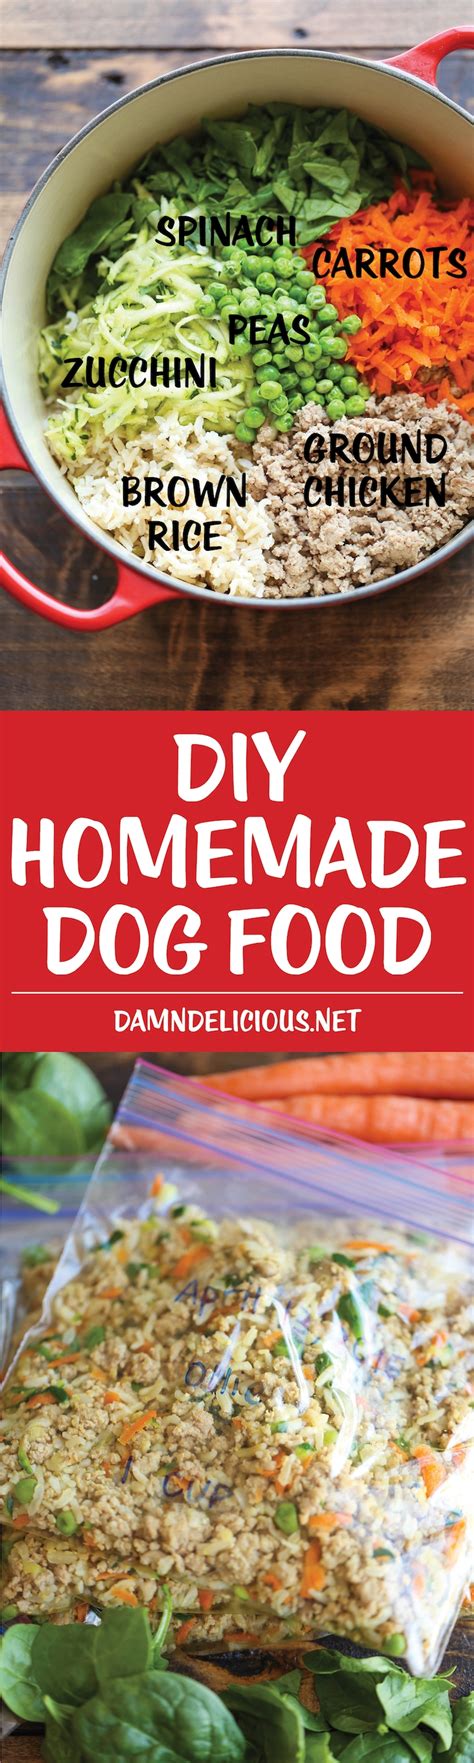 Provide food and vital supplies to shelter pets at the animal rescue site for free! 8 Pics Homemade Dog Food For Toy Poodles And Review - Alqu ...